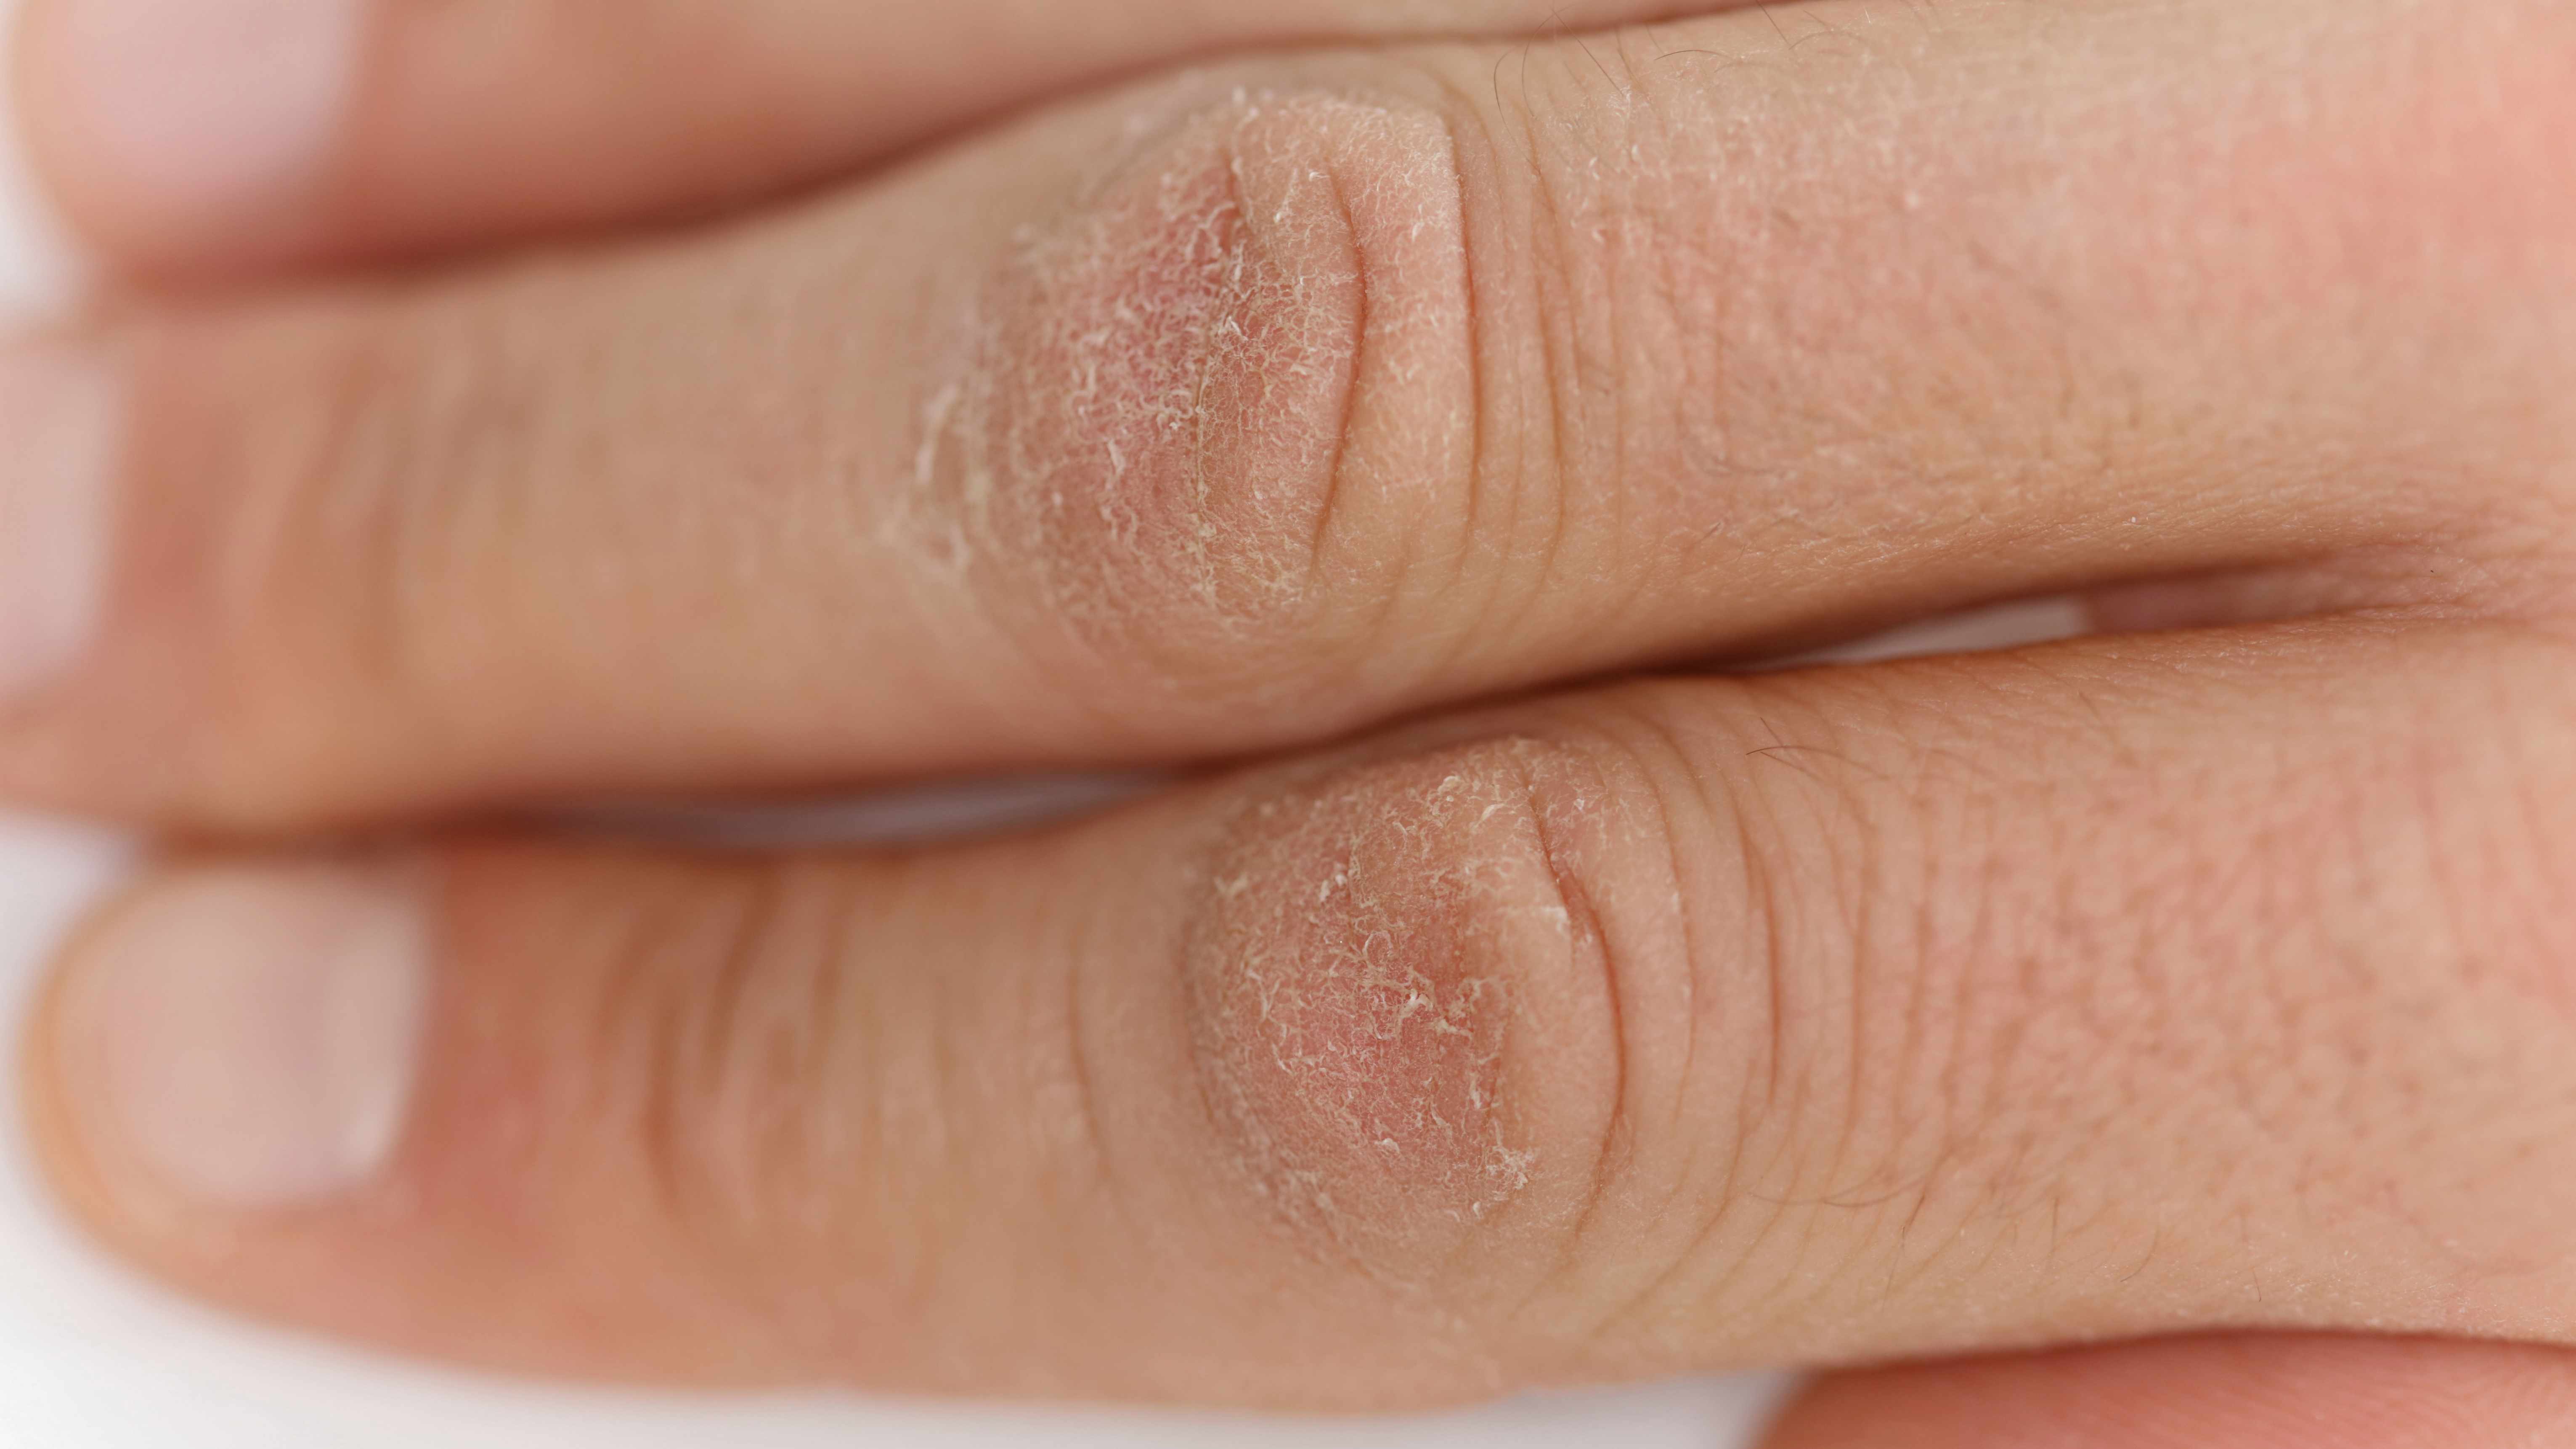 a persons fingers with dry cracked skin